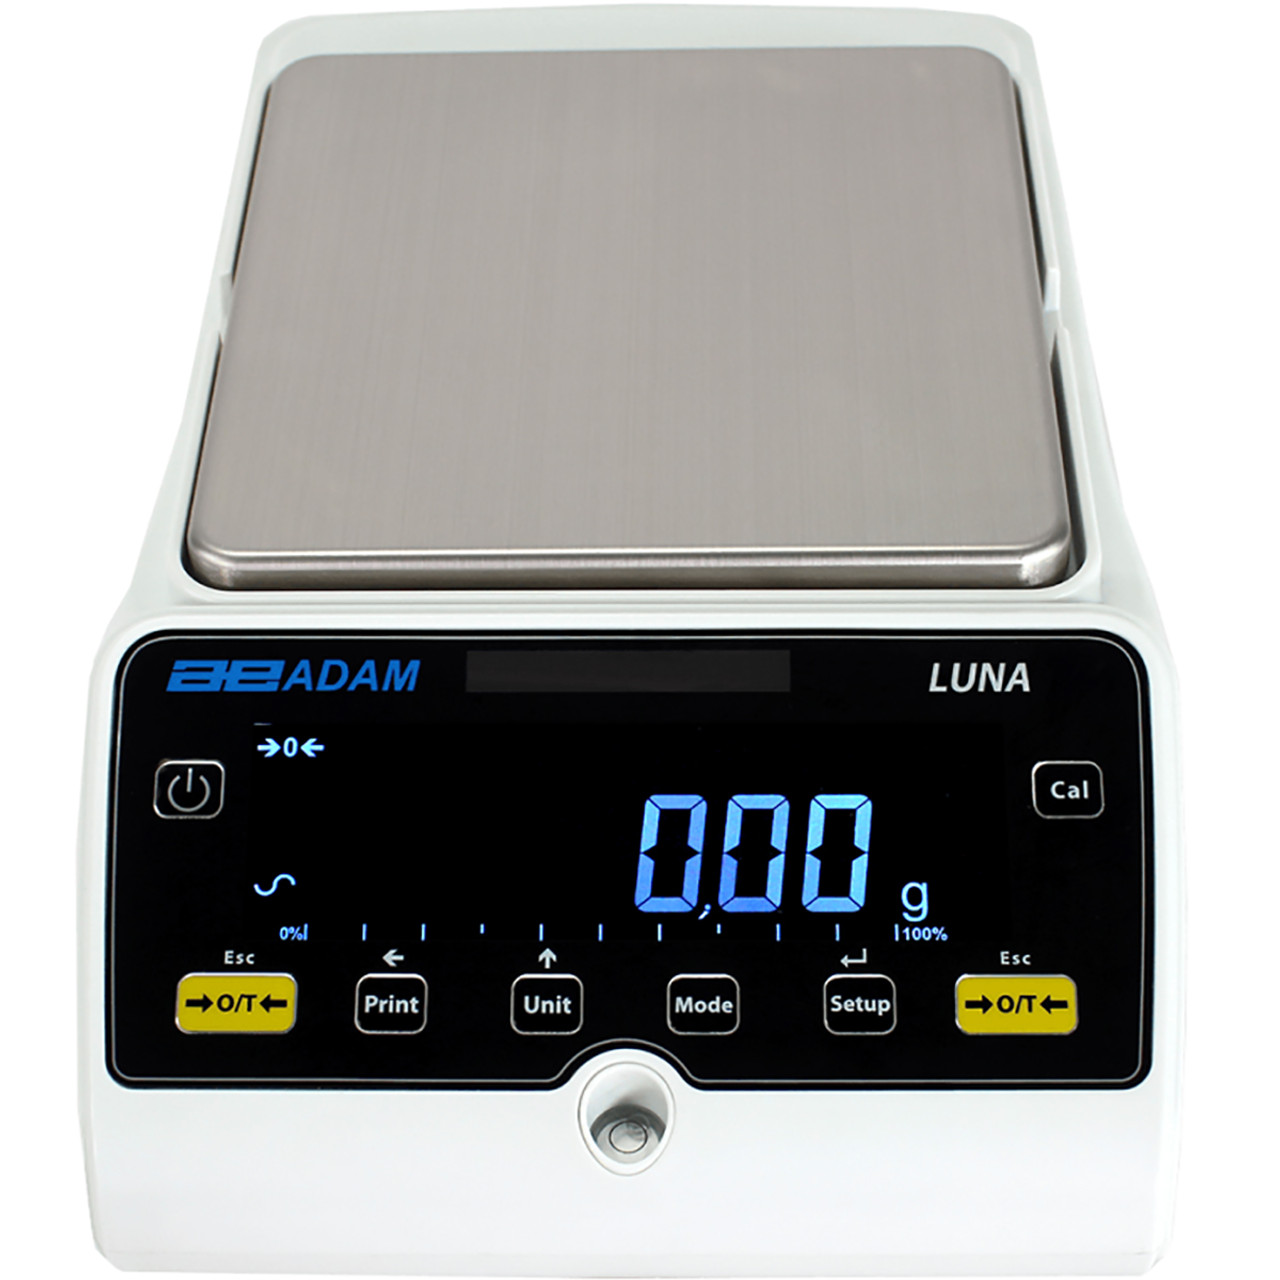 Products: Lab Balance & Industrial Scales, Lab Equipment